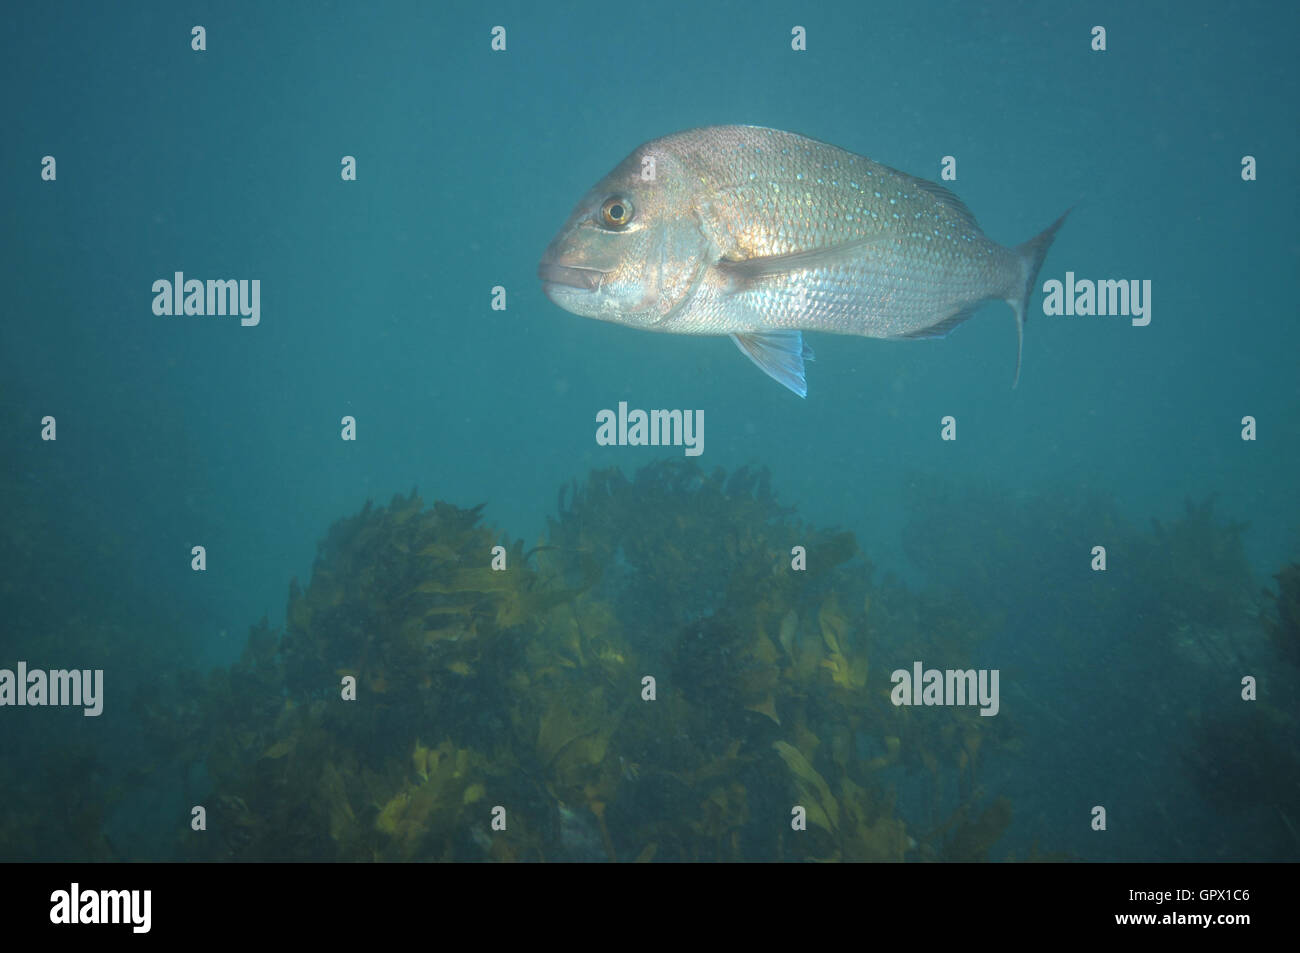 Adult australasian snapper turning in murky water above kelp forest Stock Photo